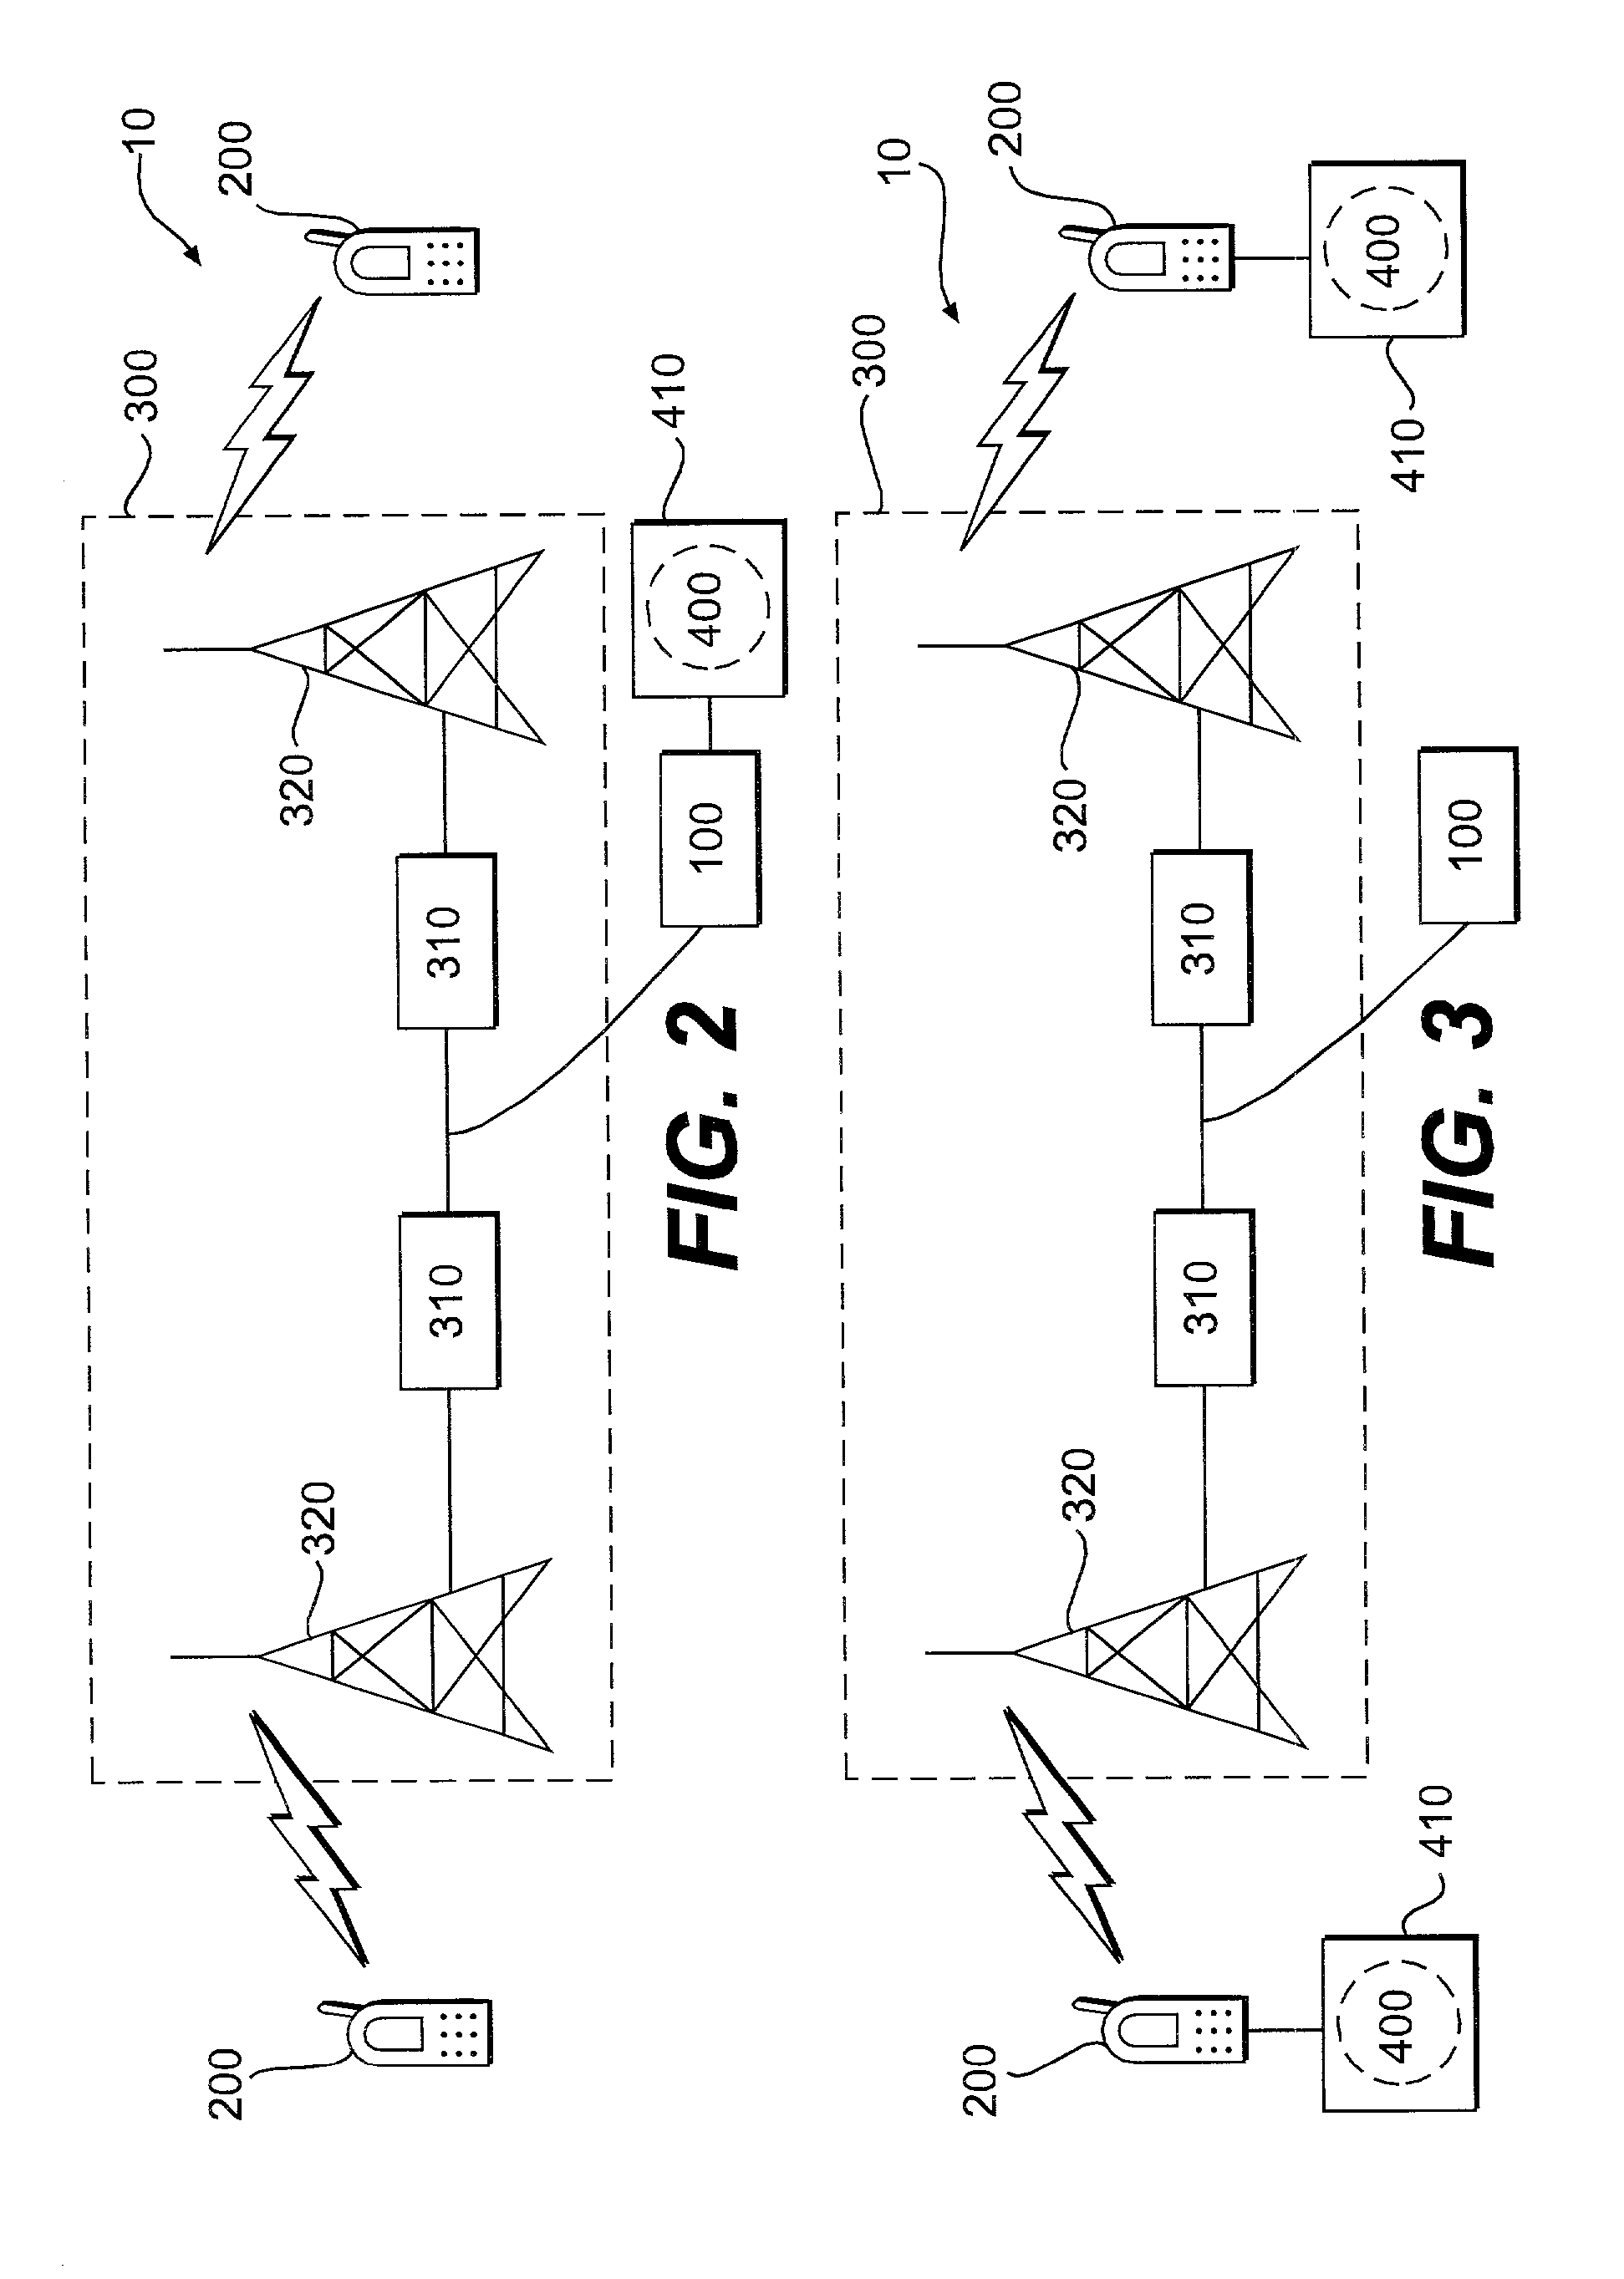 Method and system to facilitate interaction between and content delivery to users of a wireless communications network